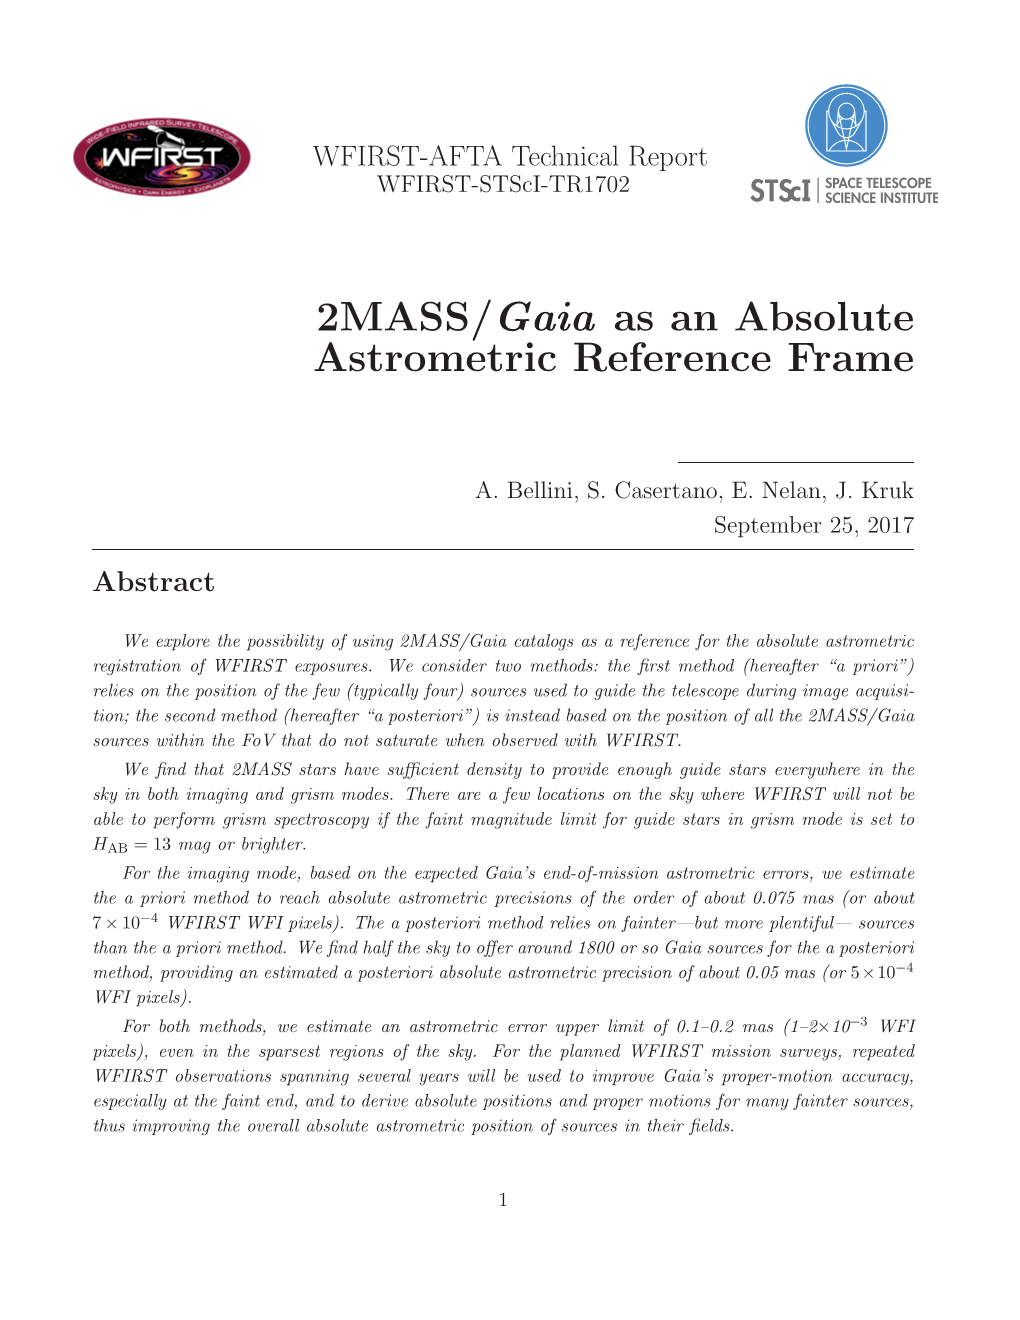 2MASS/Gaia As an Absolute Astrometric Reference Frame